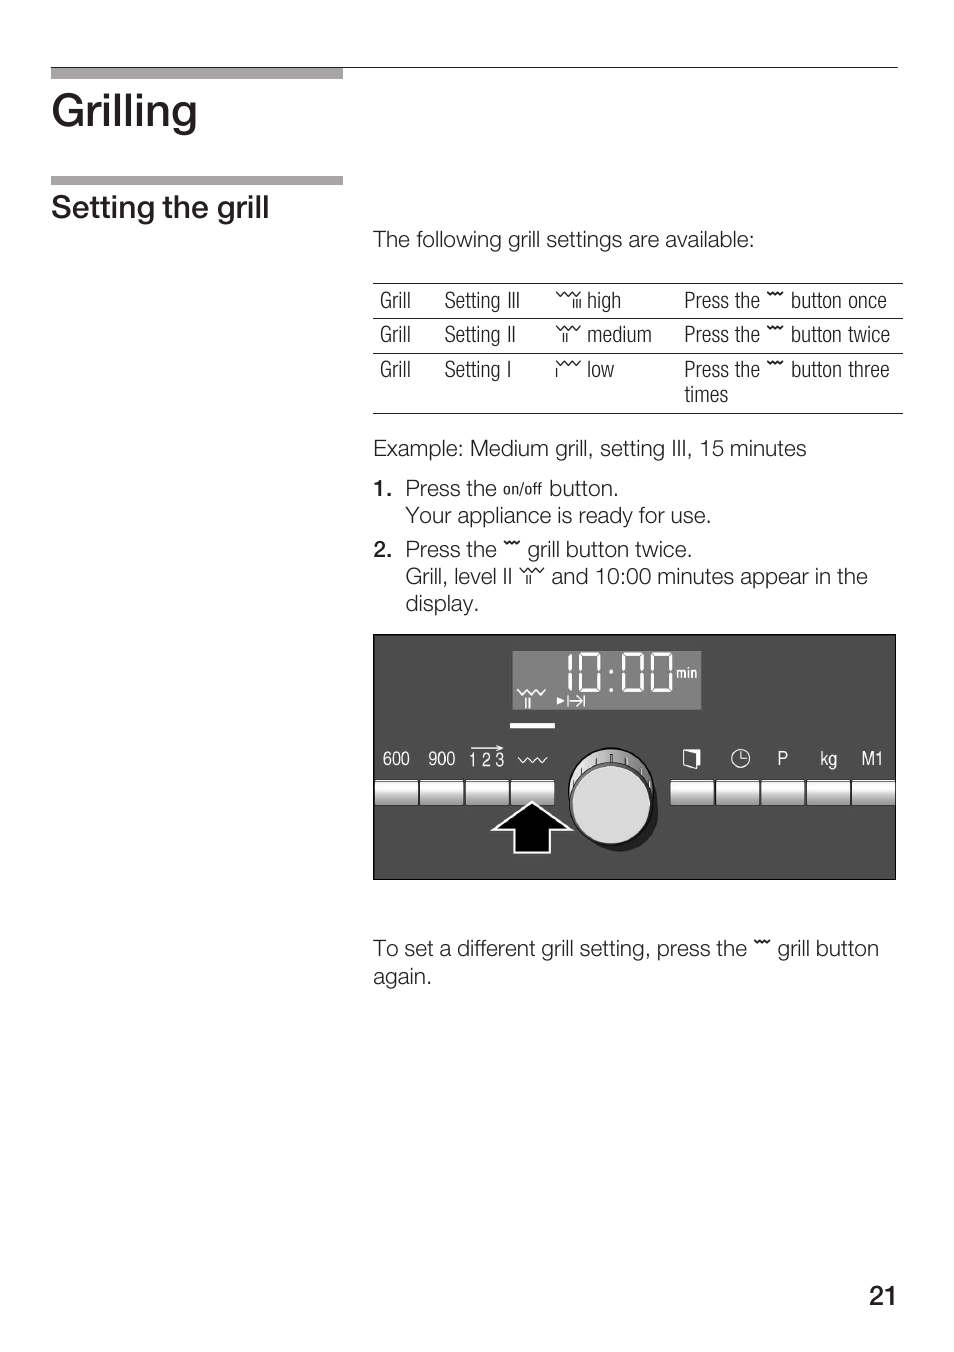 Grilling, Setting the grill | Siemens HF25G5L2 User Manual | Page 21 / 204  | Original mode